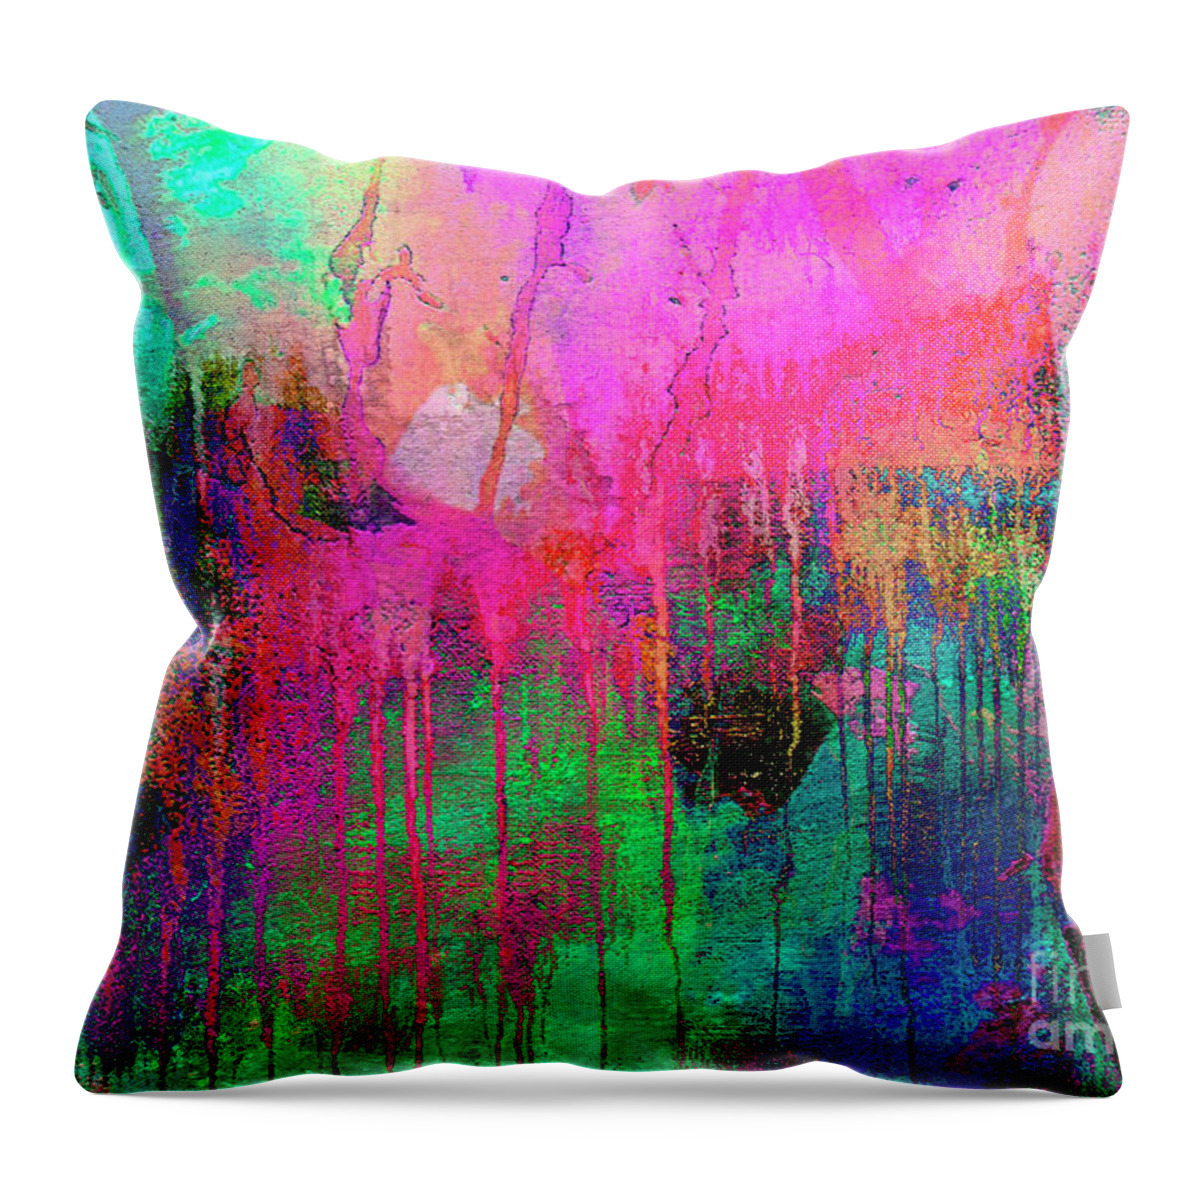 621 Throw Pillow featuring the painting Abstract Painting 621 Pink Green Orange Blue by Ricardos Creations